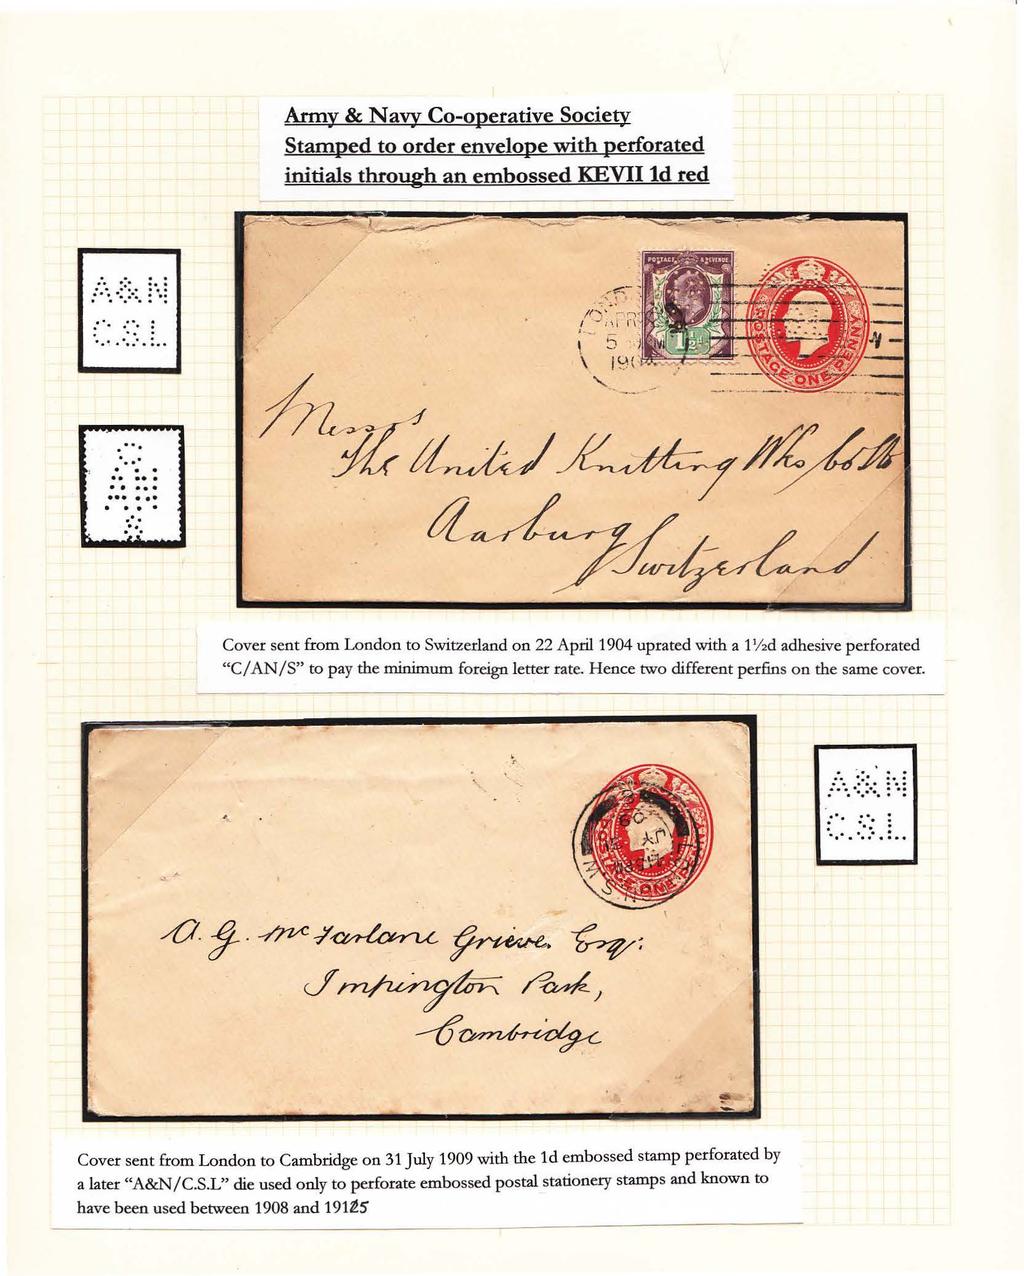 Army & Navy Co-operative Society Stamped to order envelope with perforated initials through an embossed KE